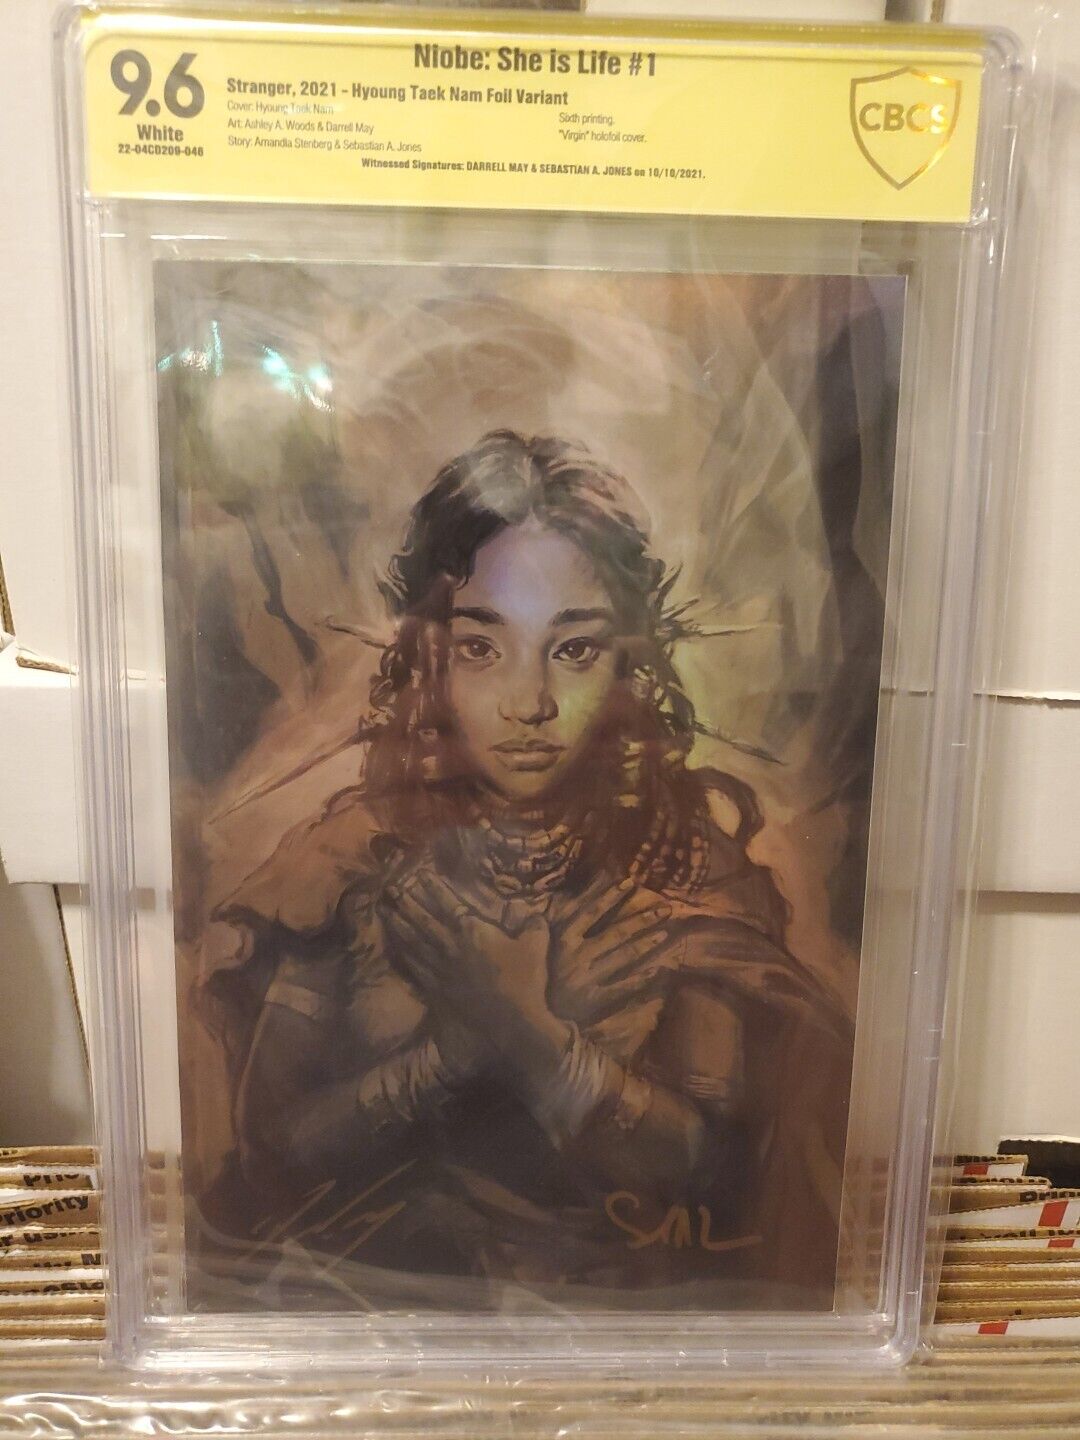 Niobe She Is Life #1 Foil Variant Ltd. 100 Copies CBCS 9.6 2x Signed By Darrell